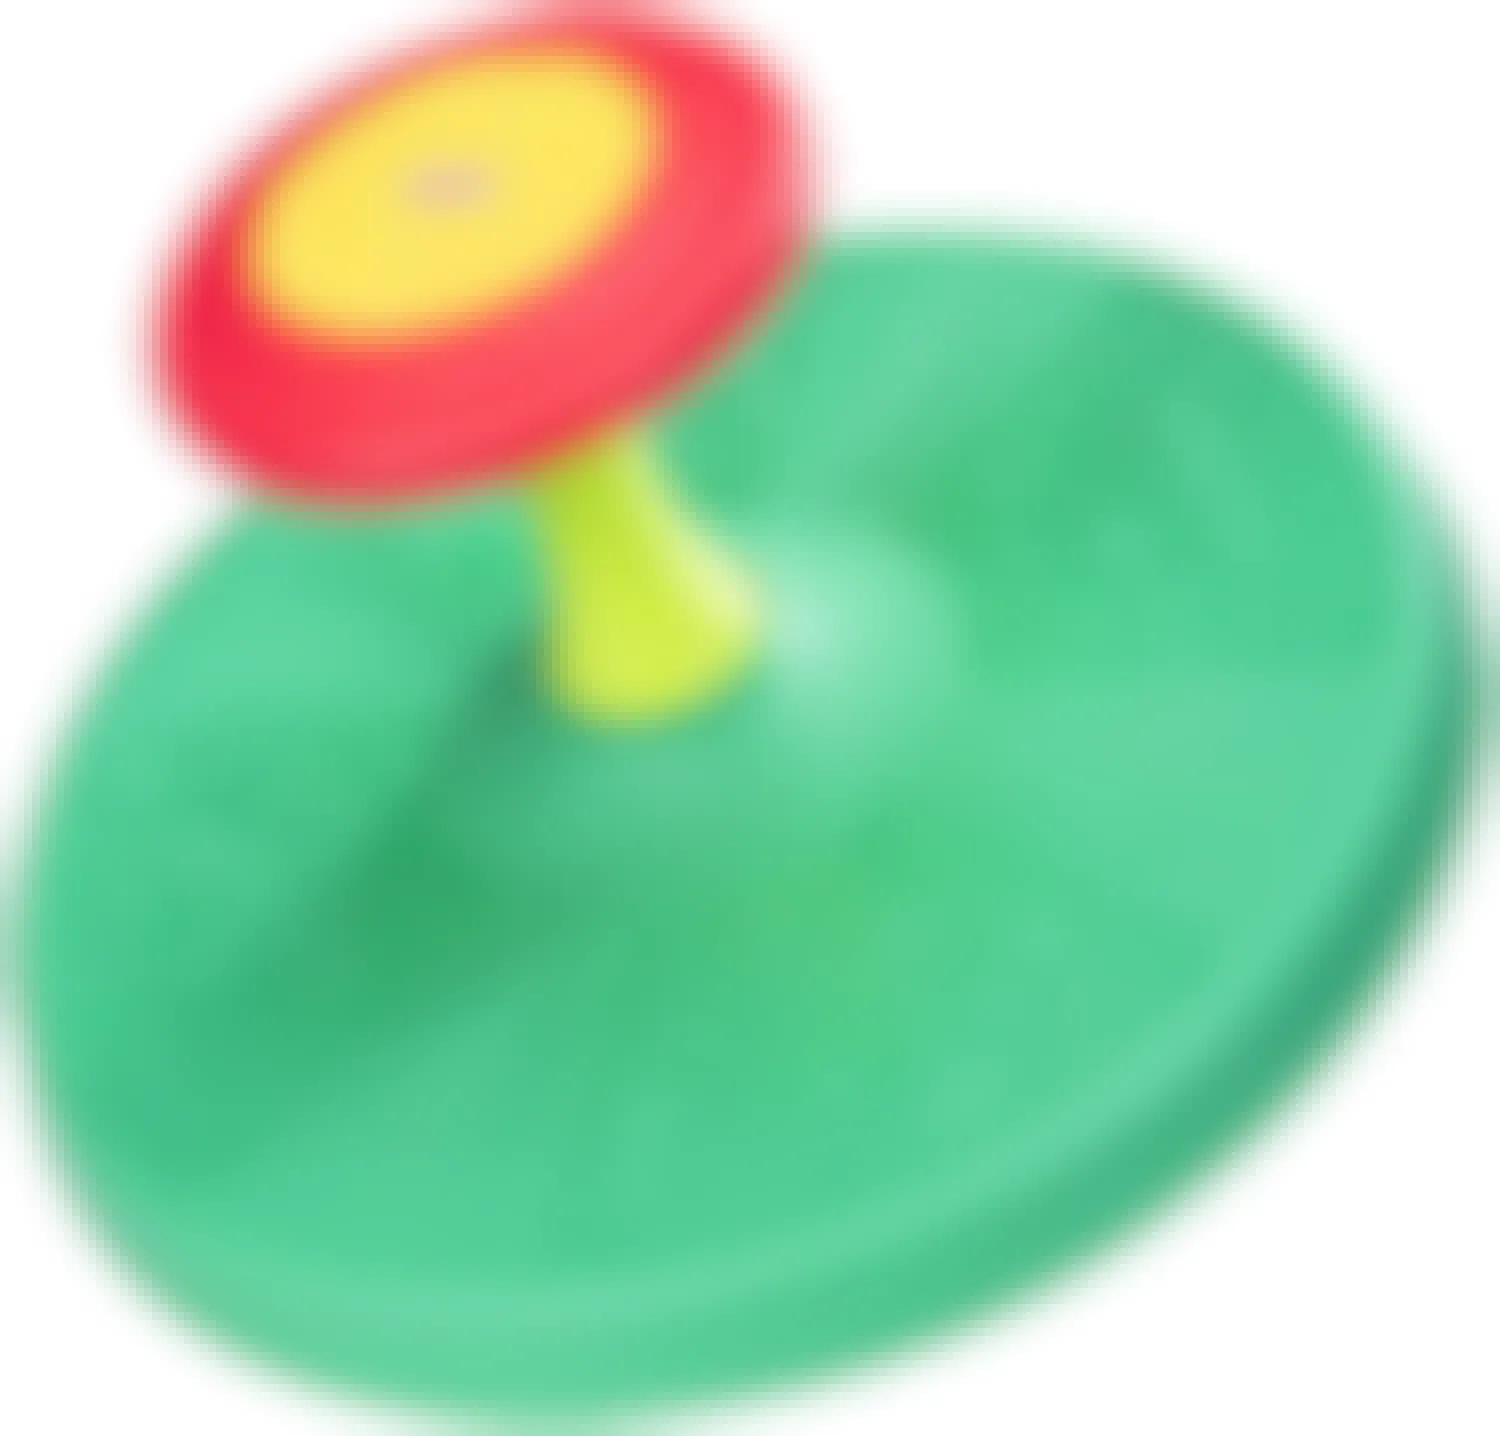 gifts for 2 year olds - A Playskool Sit 'n Spin Activity Toy on a white background.